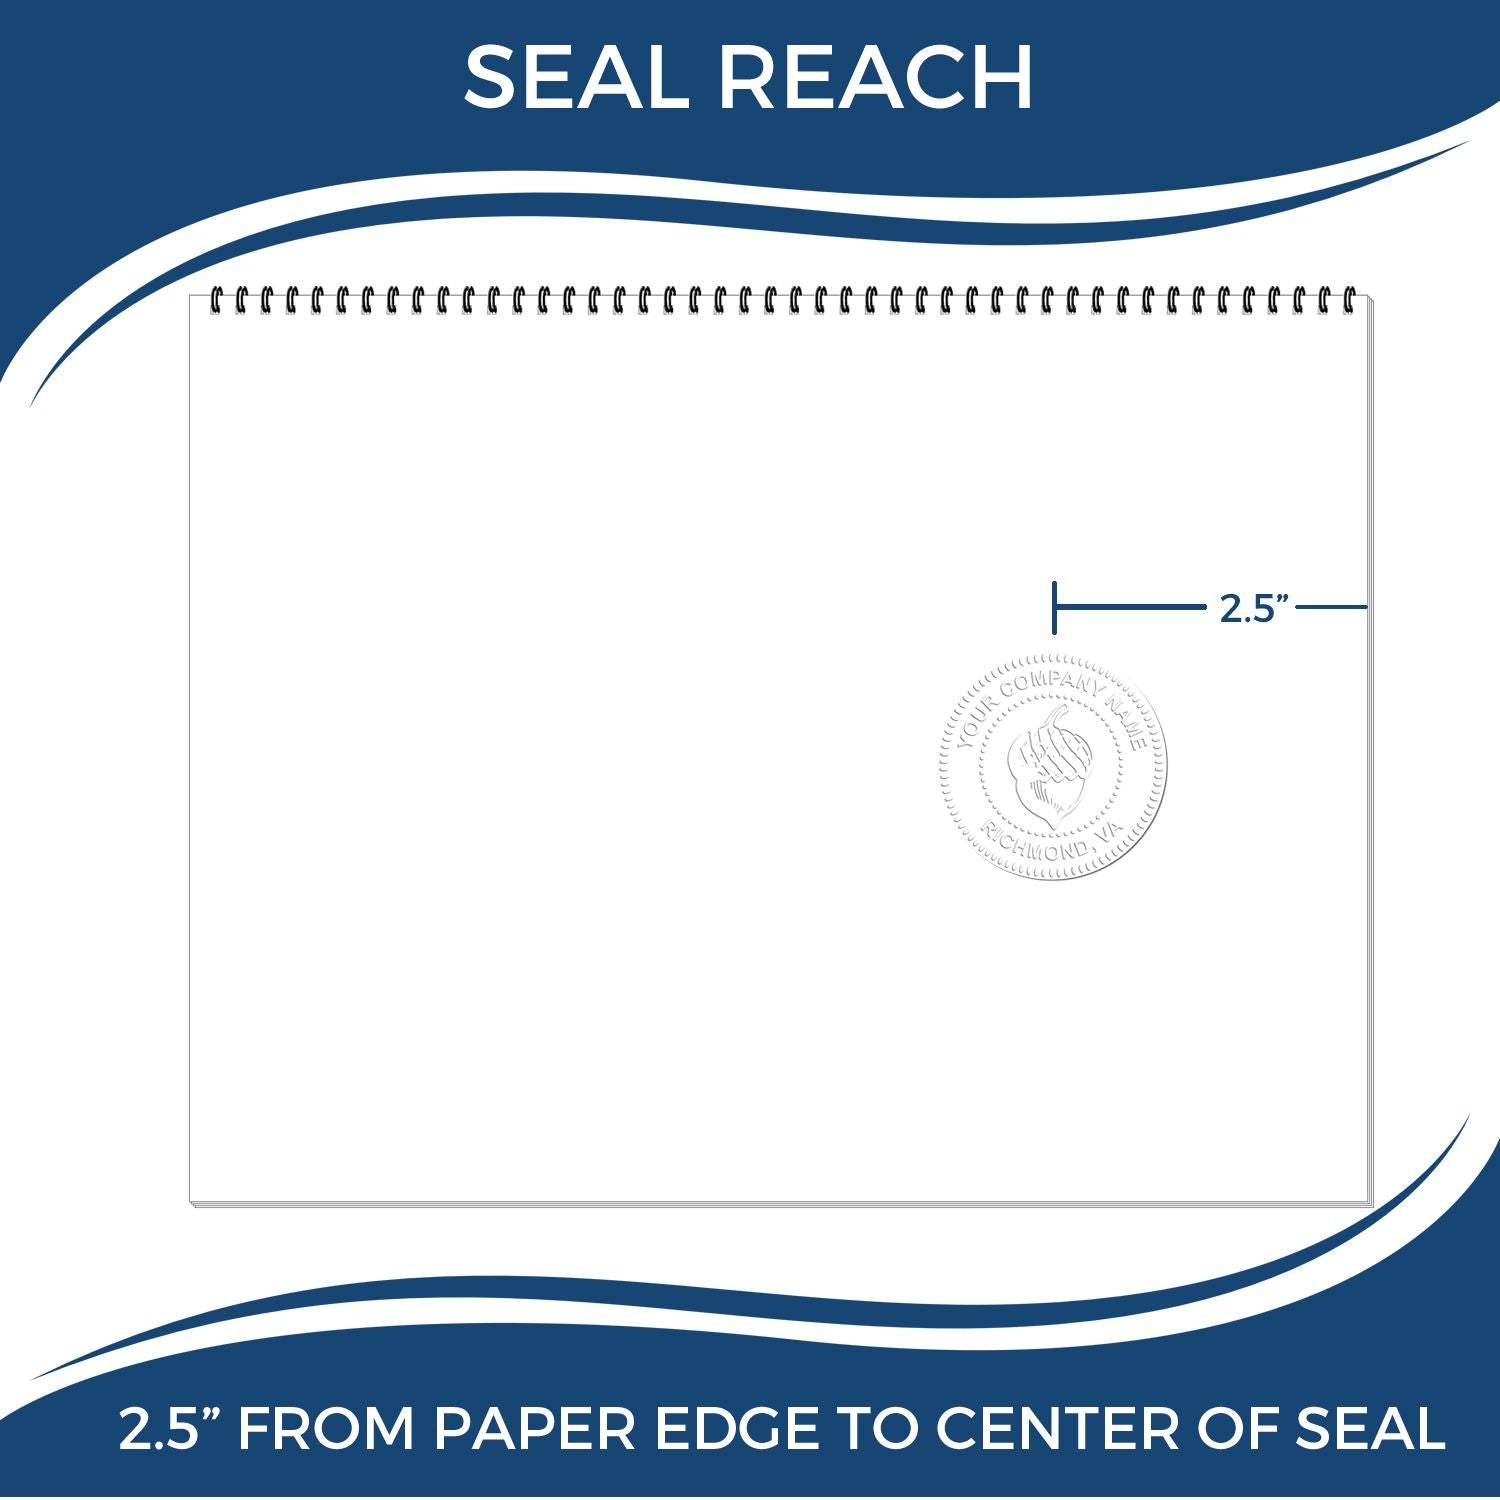 An infographic showing the seal reach which is represented by a ruler and a miniature seal image of the Long Reach Oregon Geology Seal